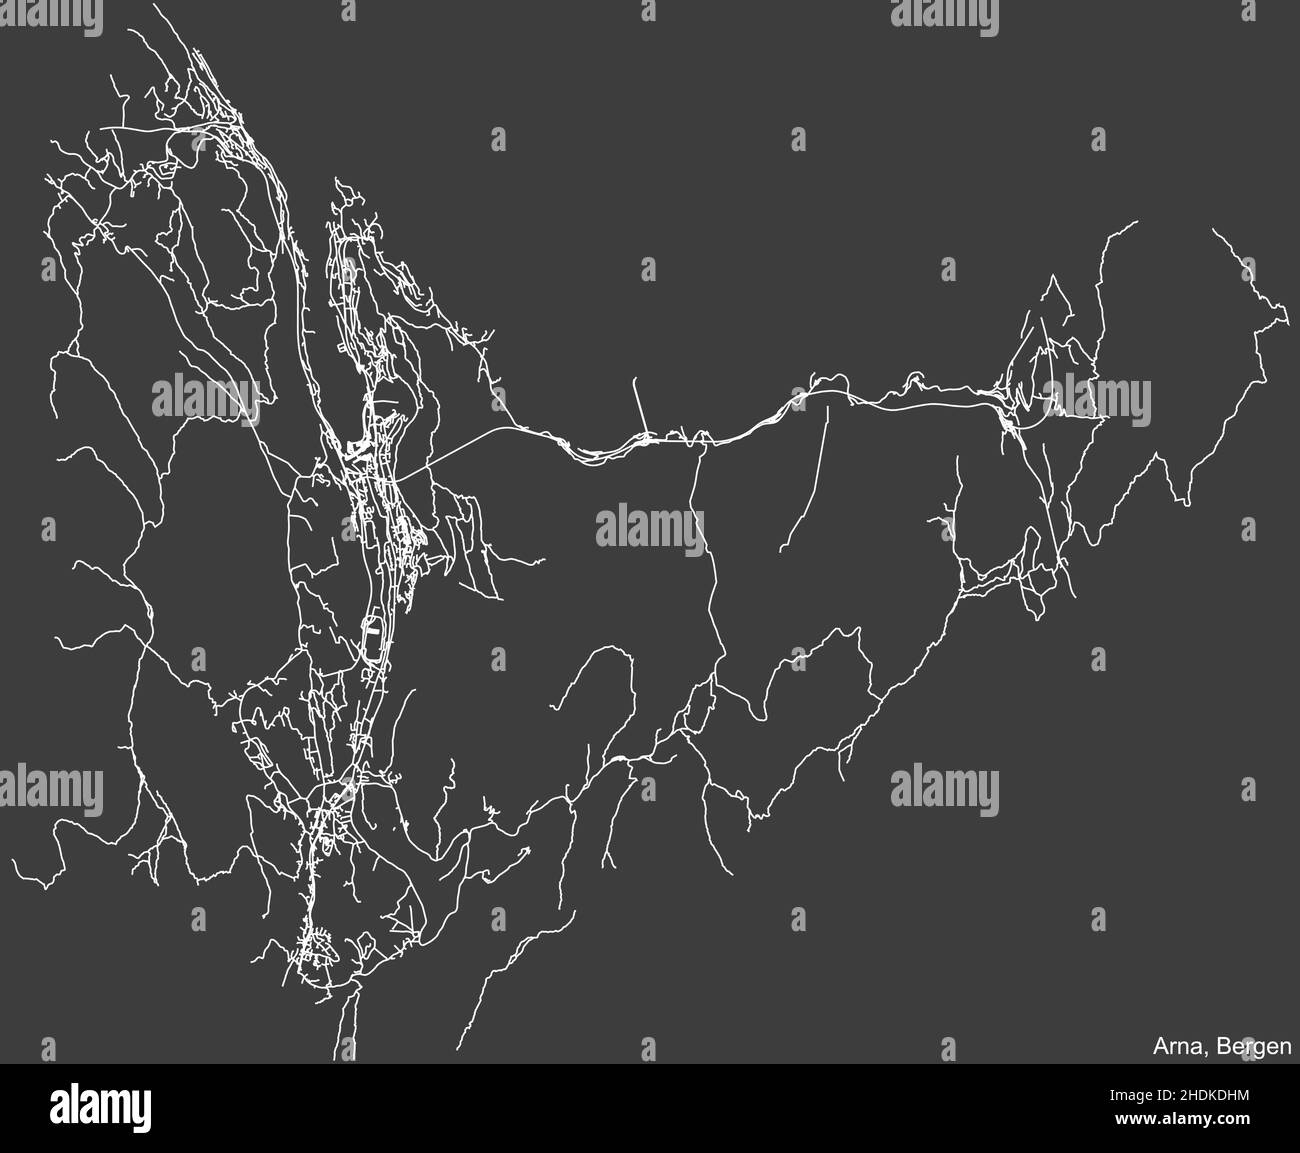 Detailed negative navigation white lines urban street roads map of the ...